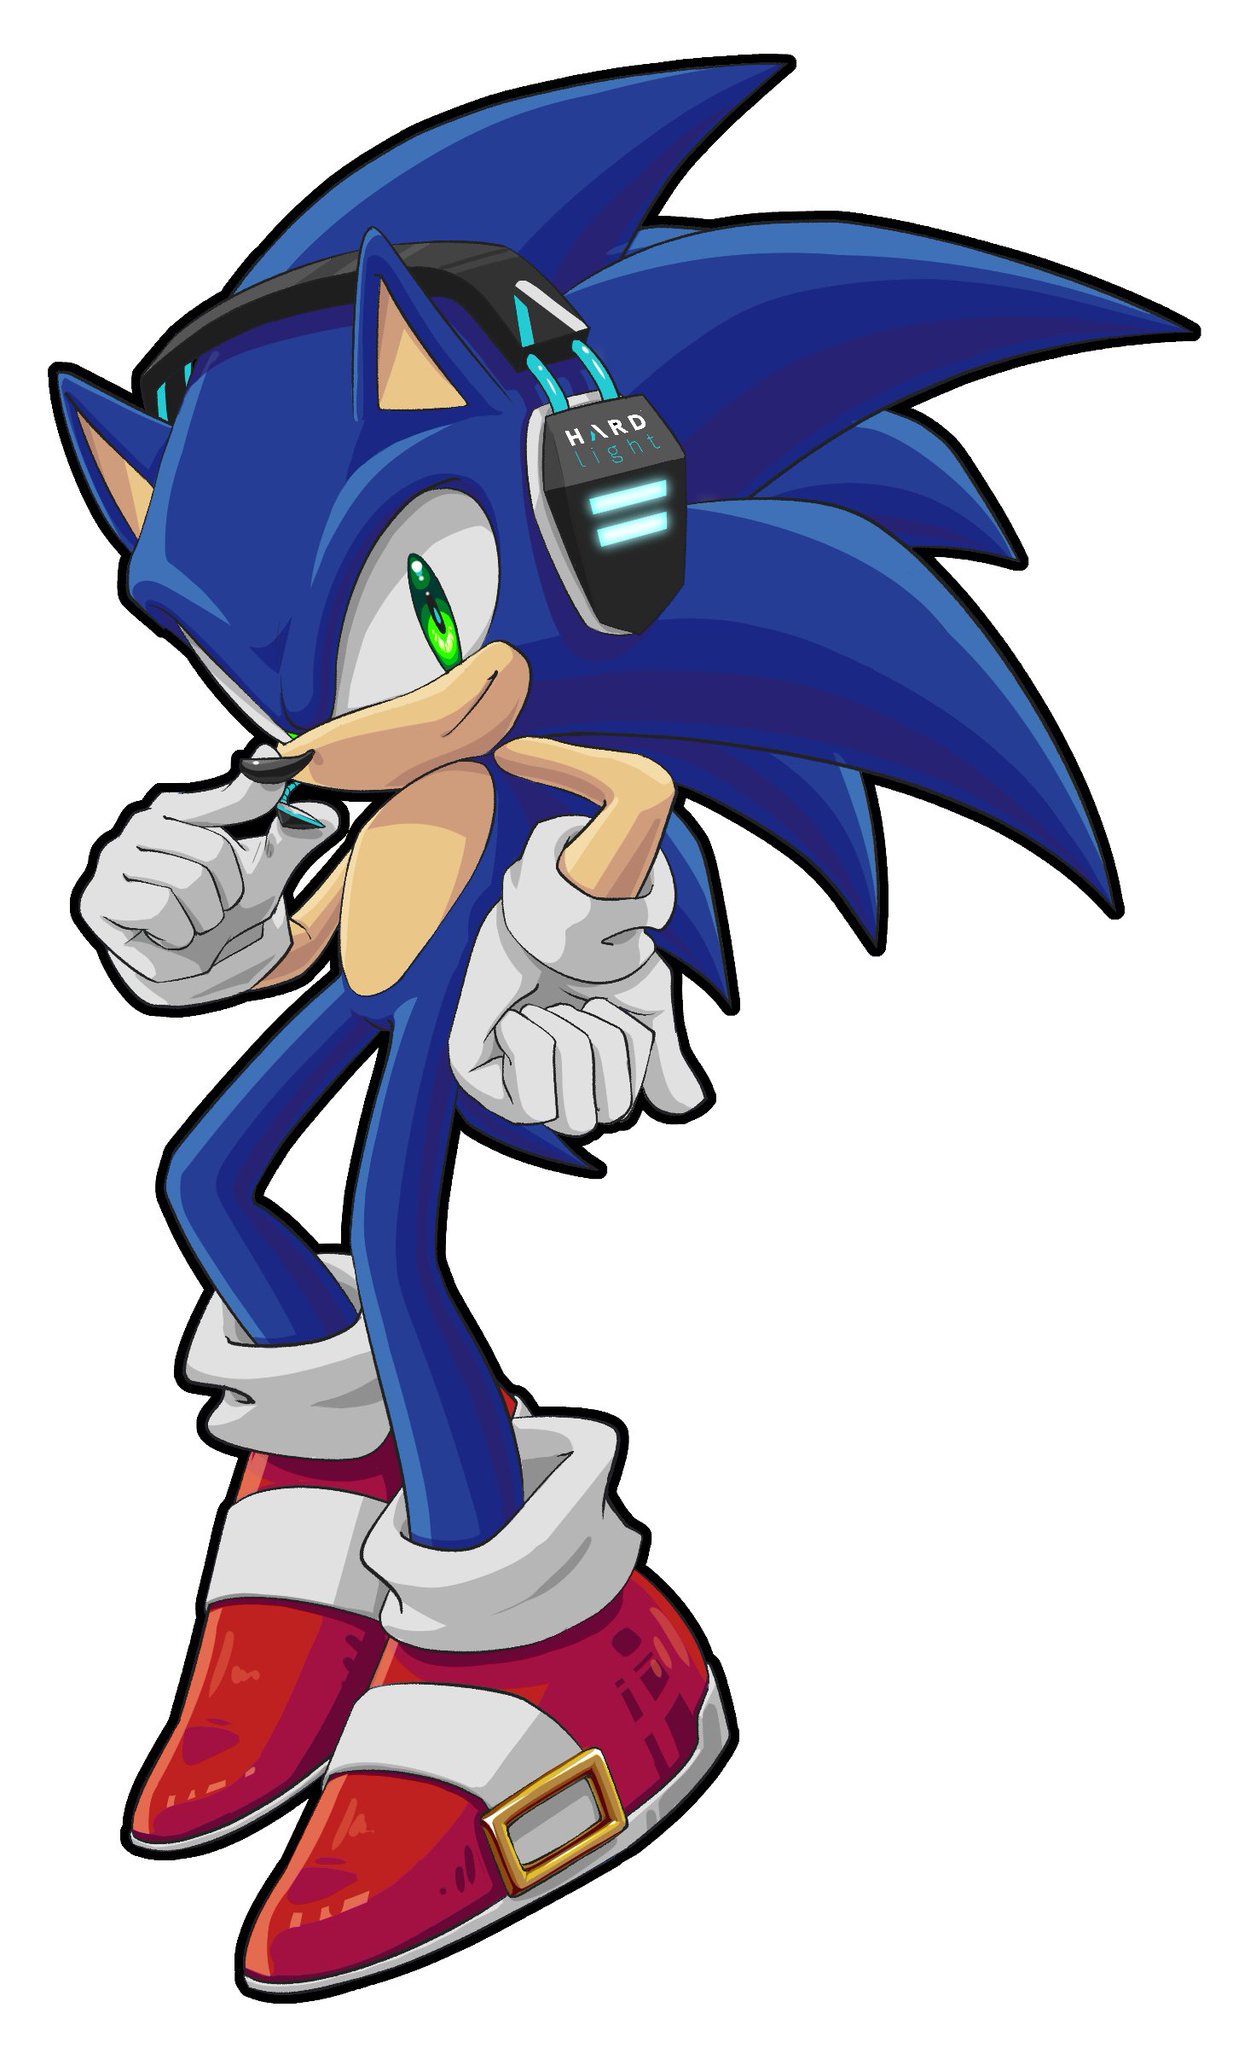 SonicWindBlue #SonicDreamTeam on X: Here is a better look at the